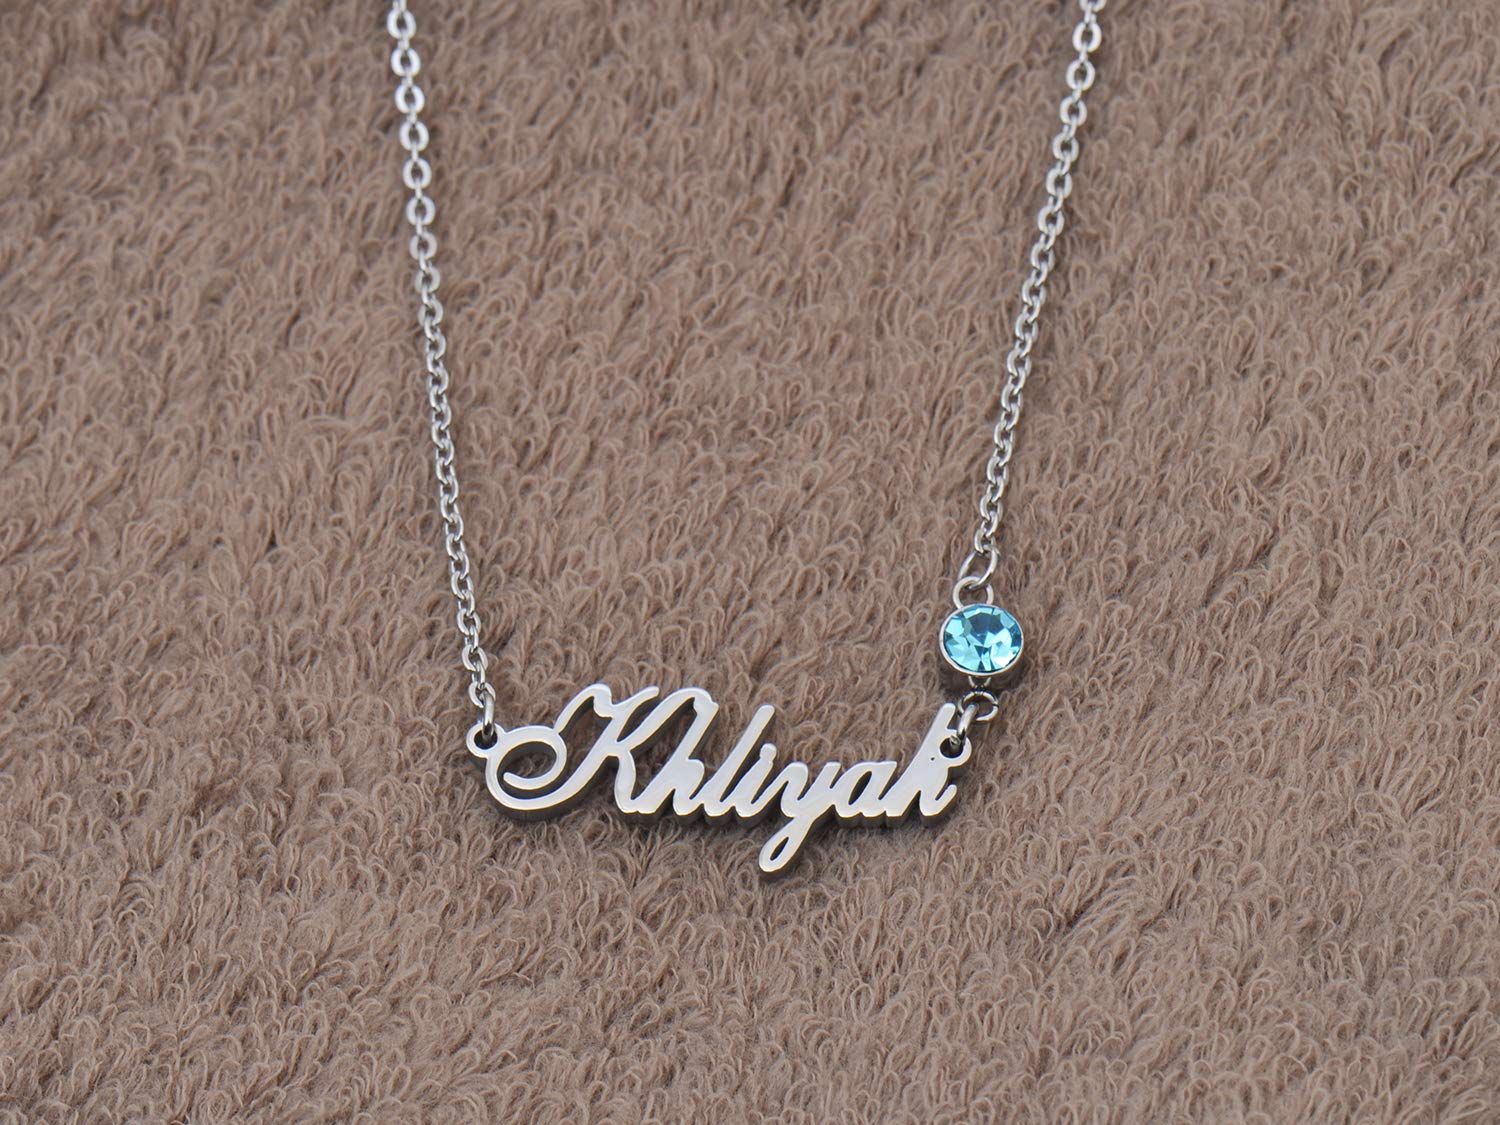 Custom Family Name Necklace Torin with Birthstone in Silver Gold